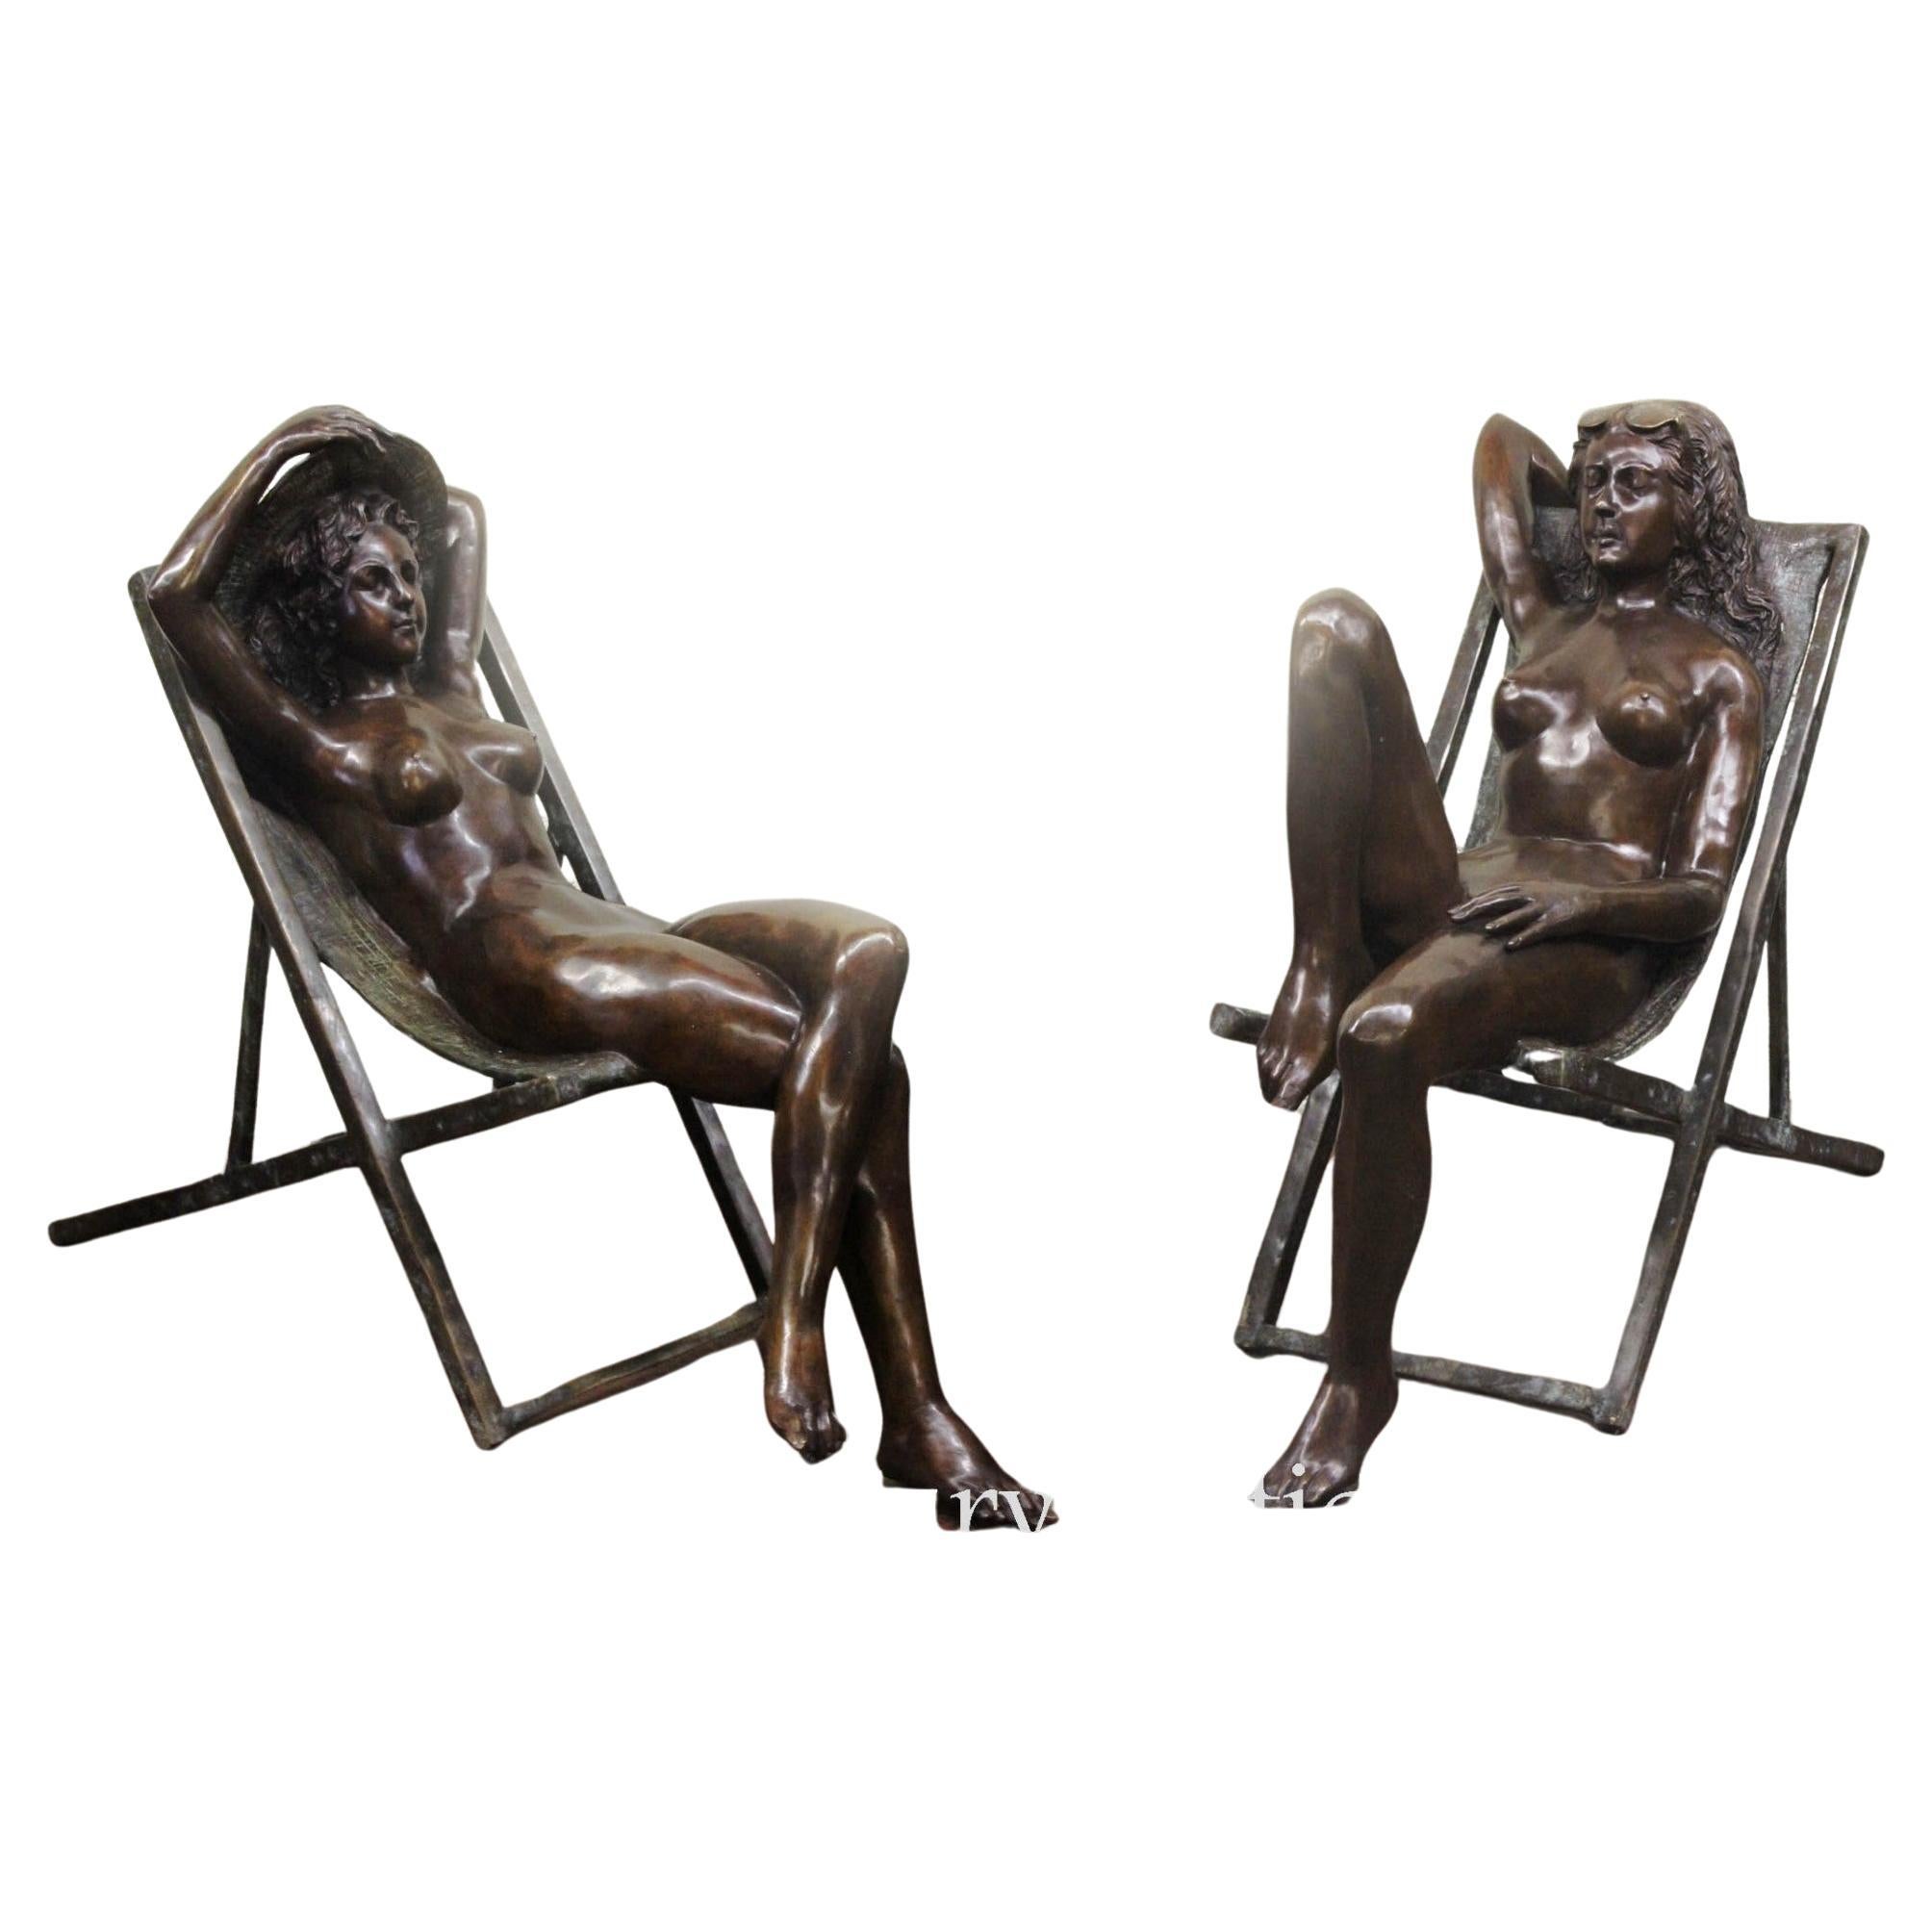 Pair Lifesize Nude Girls - Deck Chair Female Garden Statues For Sale